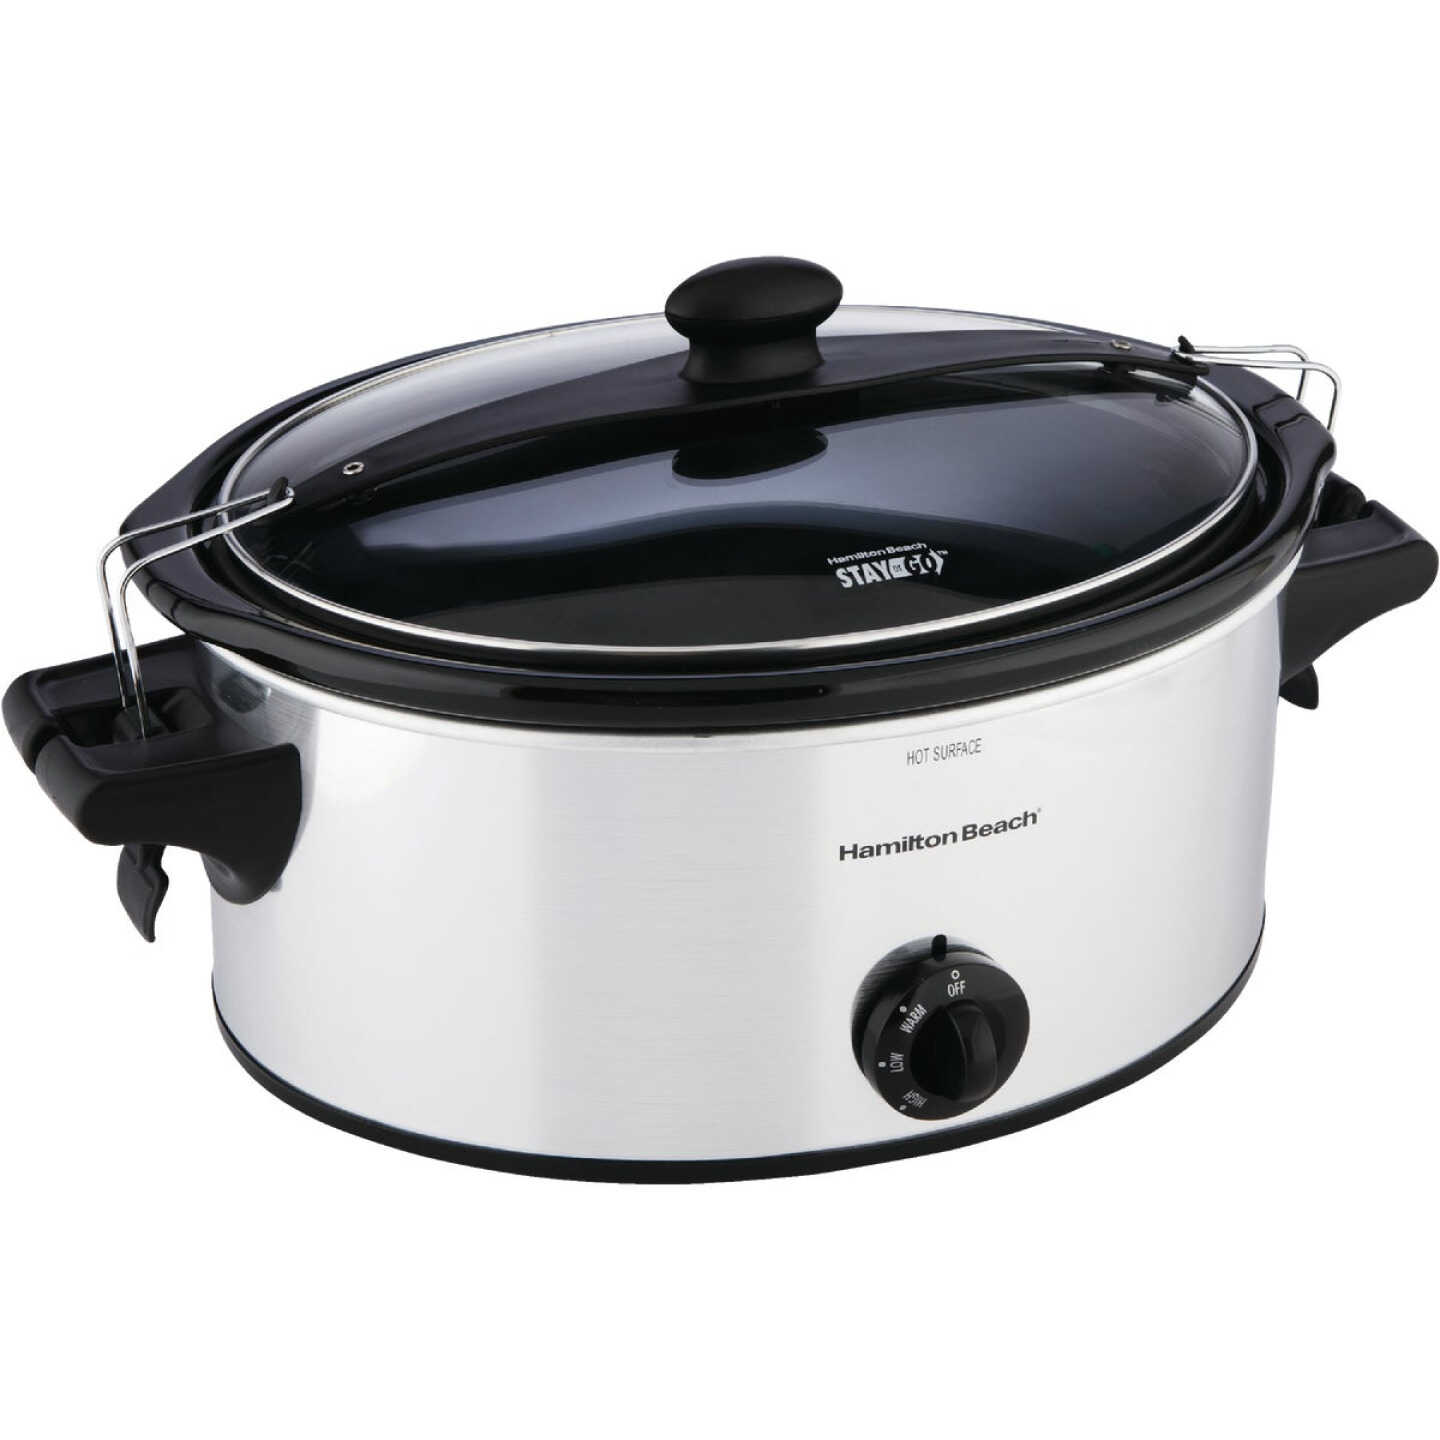 4 qt Stainless Steel Slow Cooker by Hamilton Beach at Fleet Farm